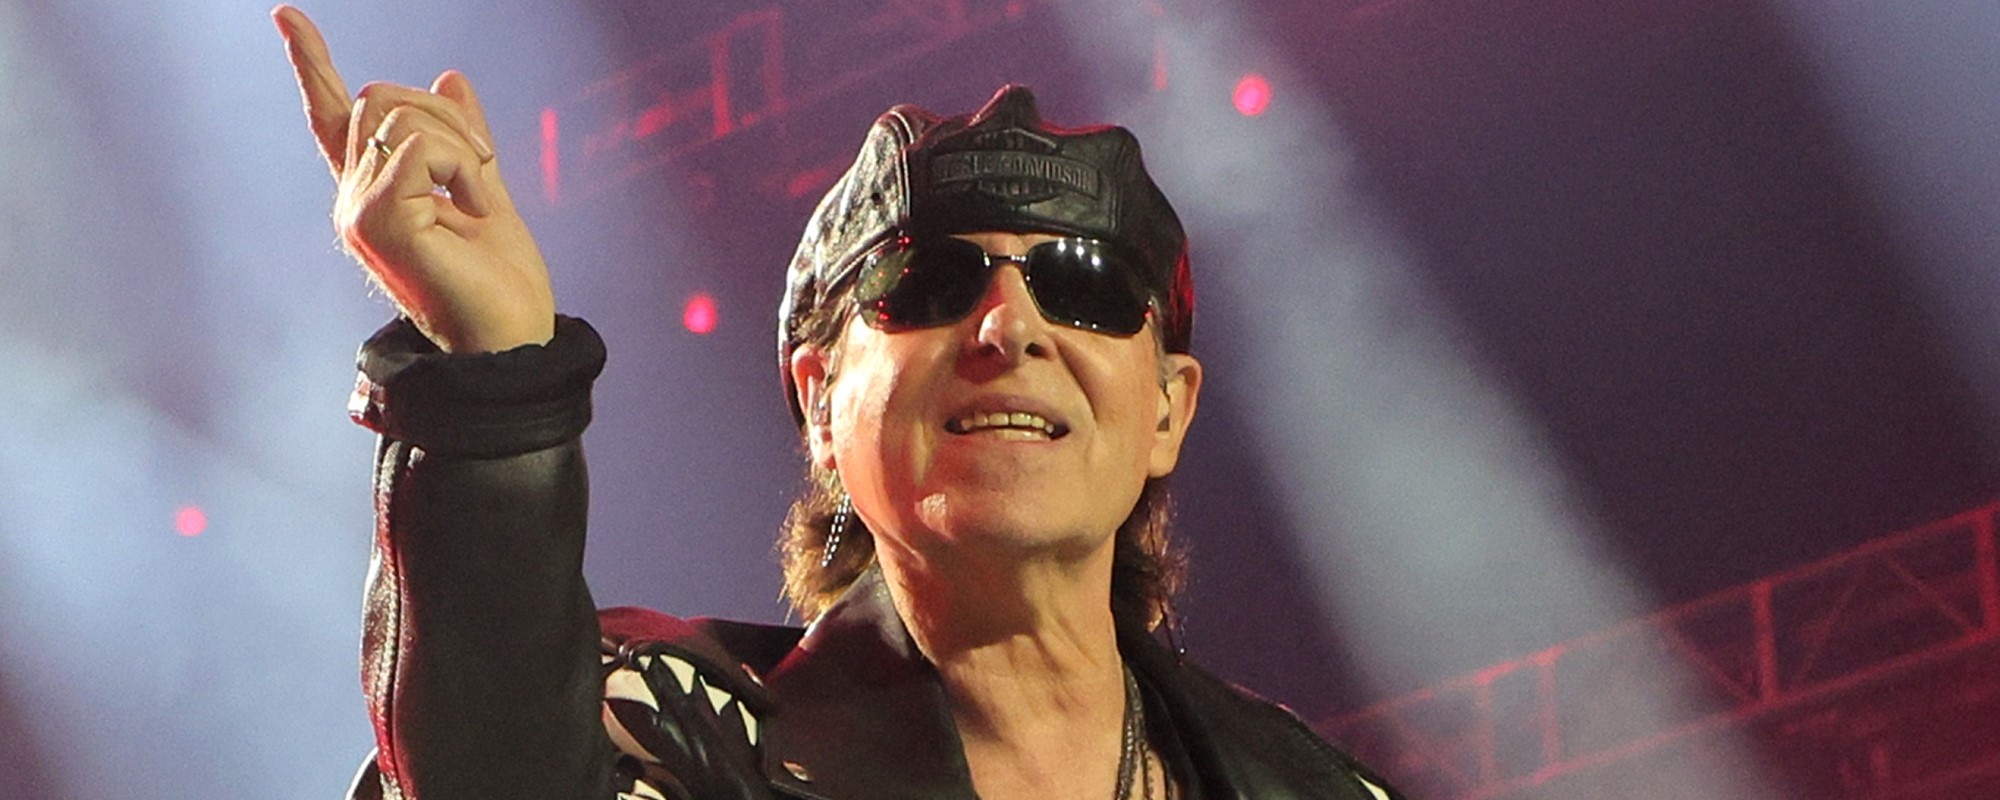 Scorpions Singer Klaus Meine Recovering from “Complex Spine Surgery,” Forcing Band to Cancel Performance